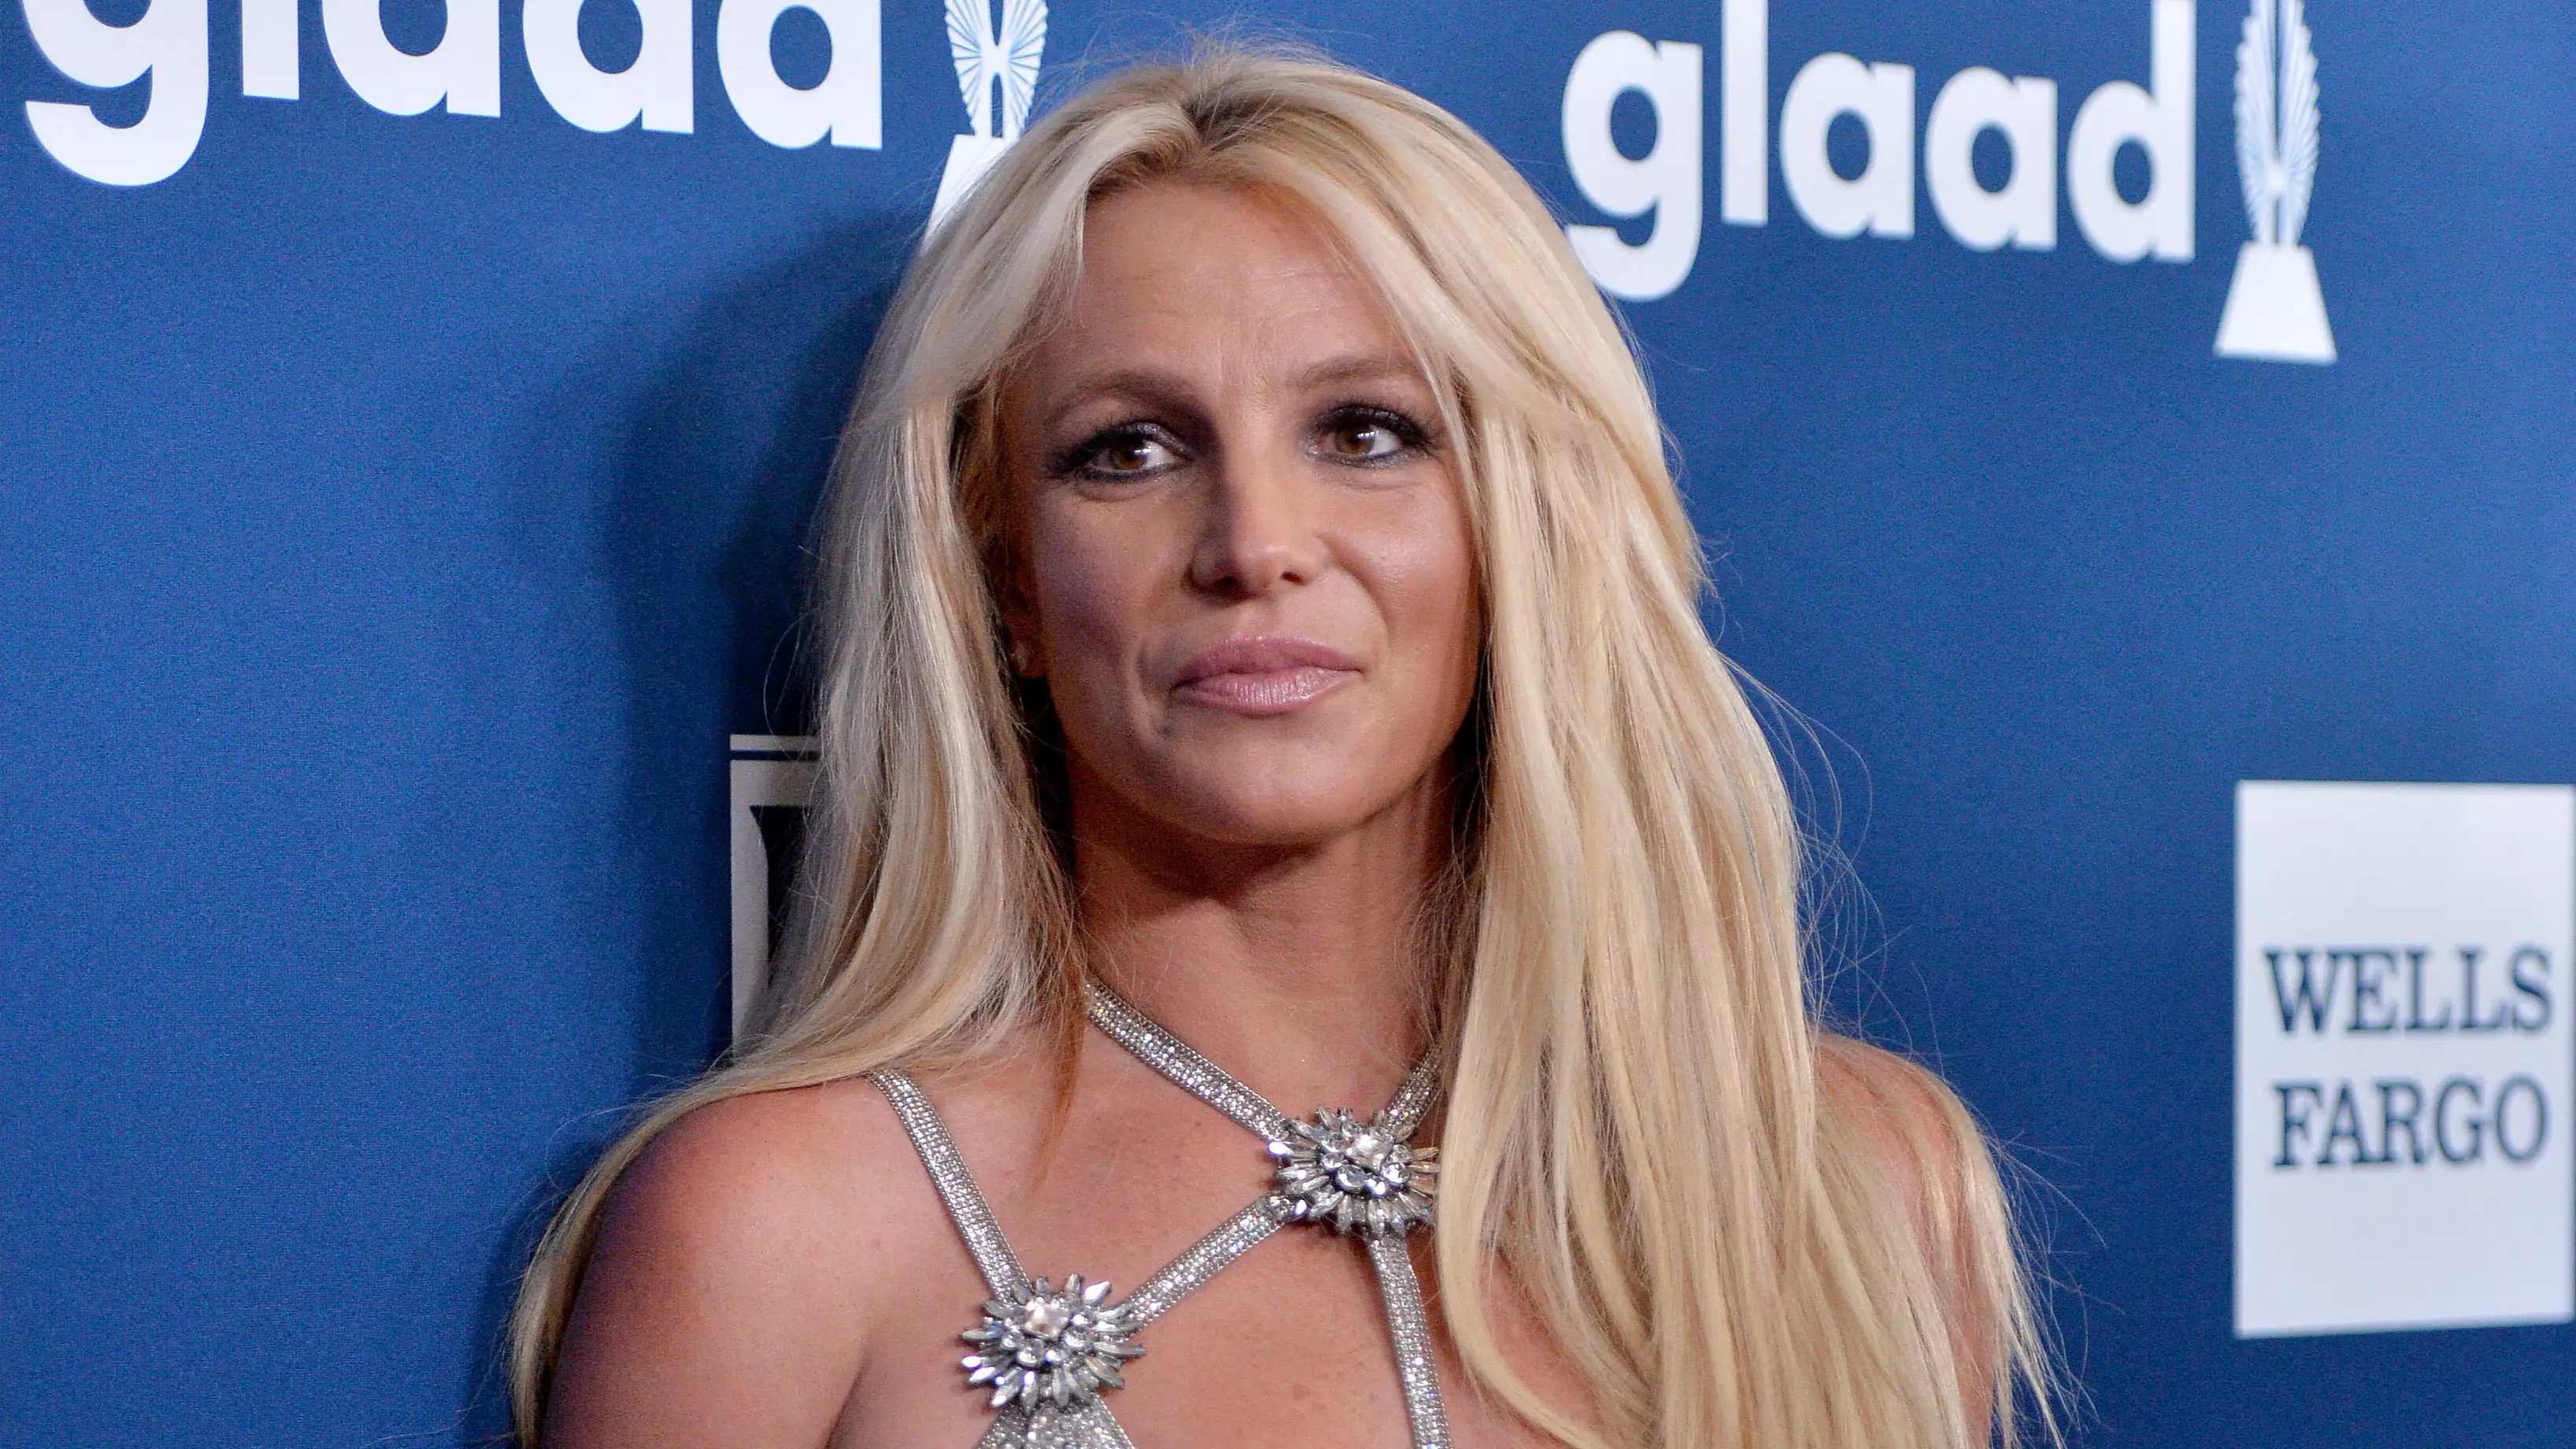 Fans Question Whether Britney Spears' Nude Instagram Photo Is Really Her